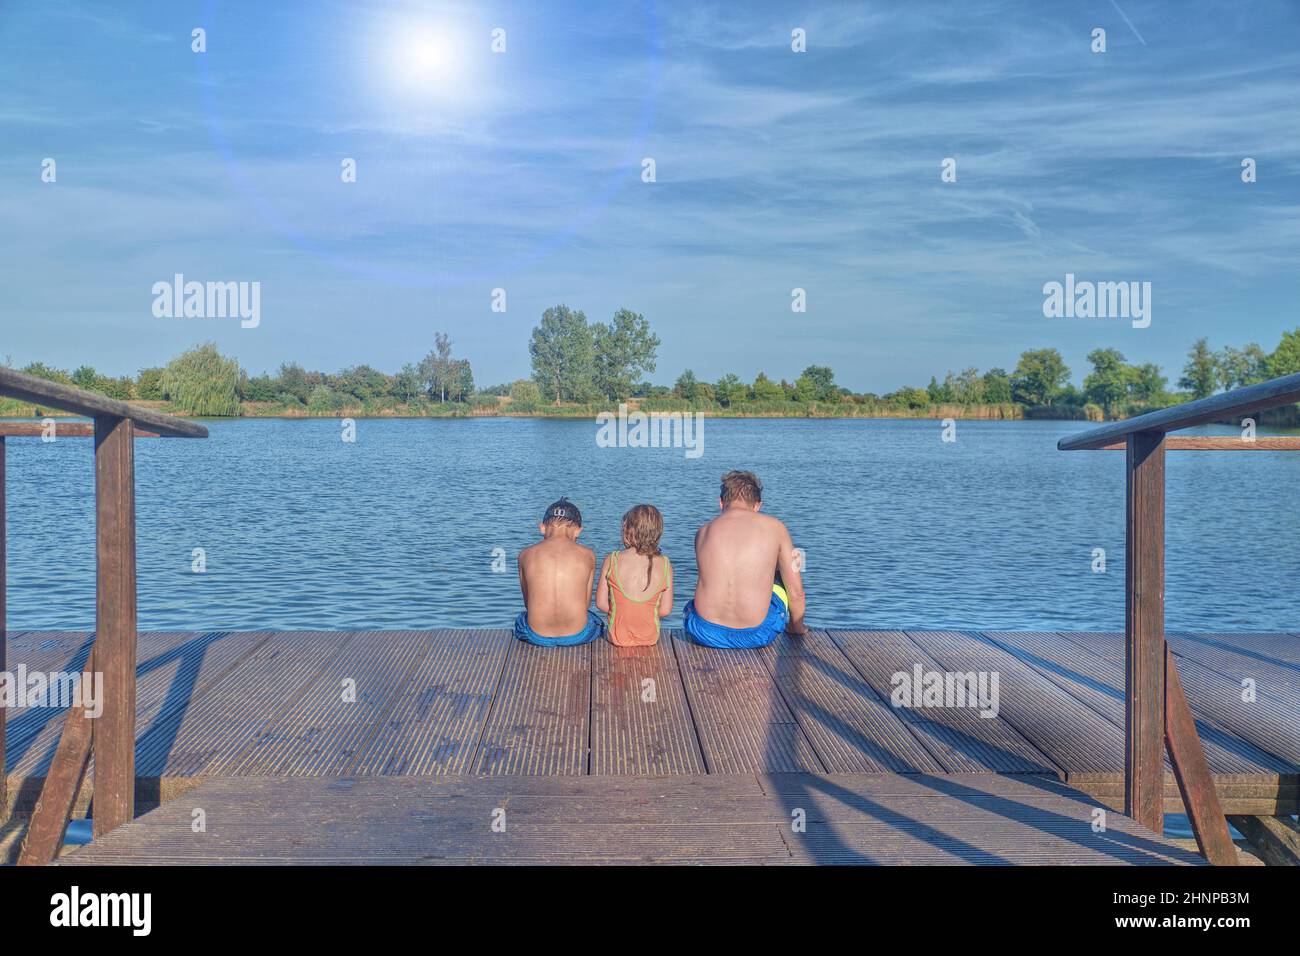 Children sitting on pier. Three children of different age - teenager boy, elementary age boy and preschool girl sitting on a wooden pier. Summer and childhood concept. Children on bench at the lake. Siblings sitting on wooden pier Stock Photo